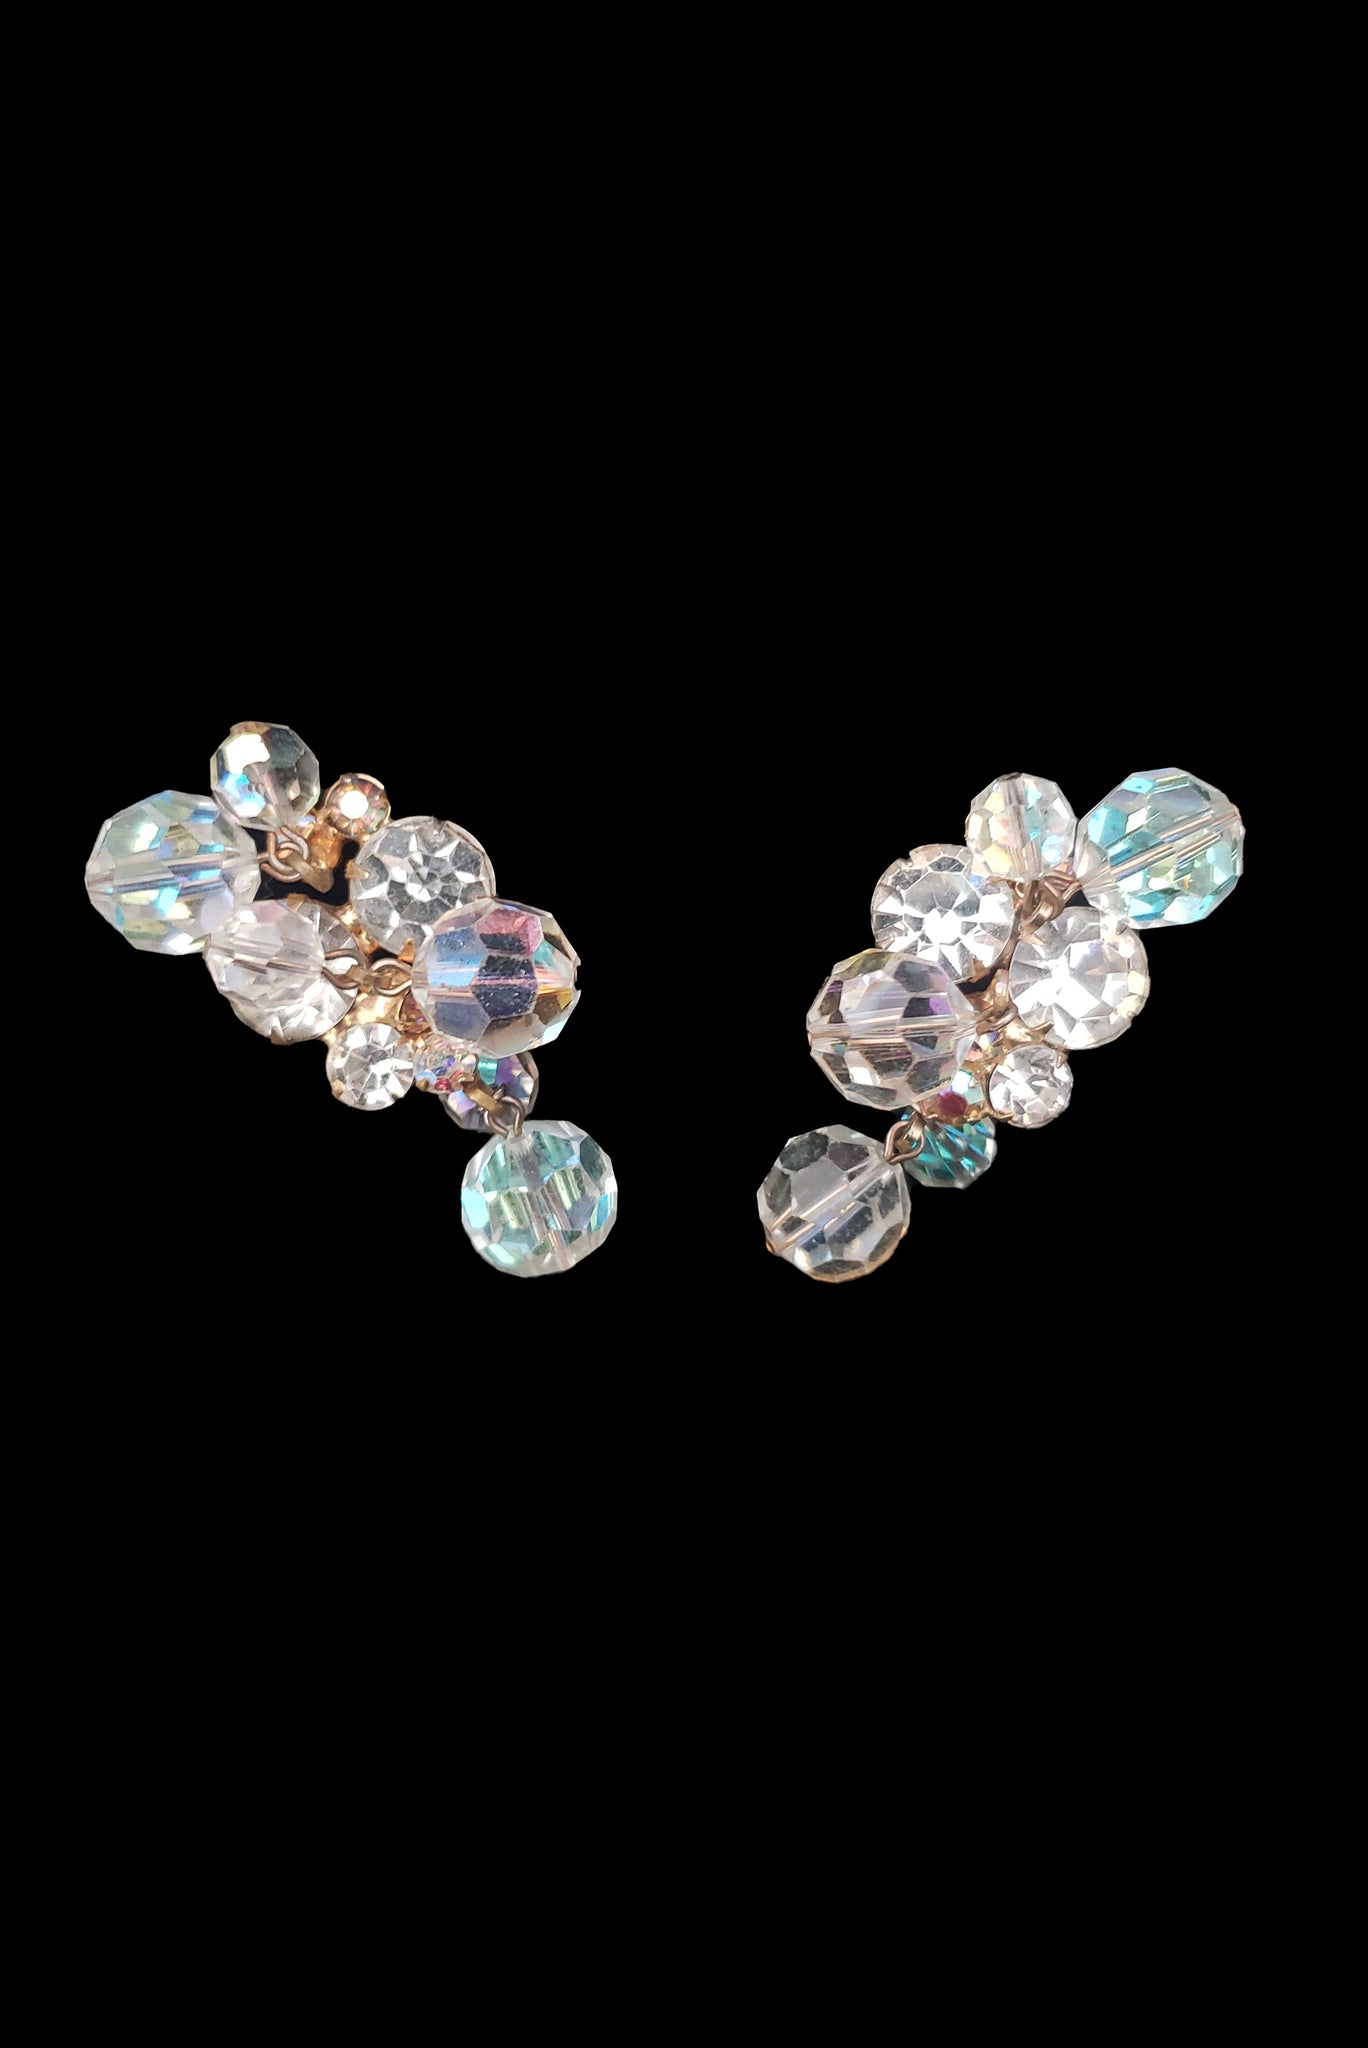 1960s Vintage Iridescent Rhinestone and Crystal Clip-On "Shake" Earrings